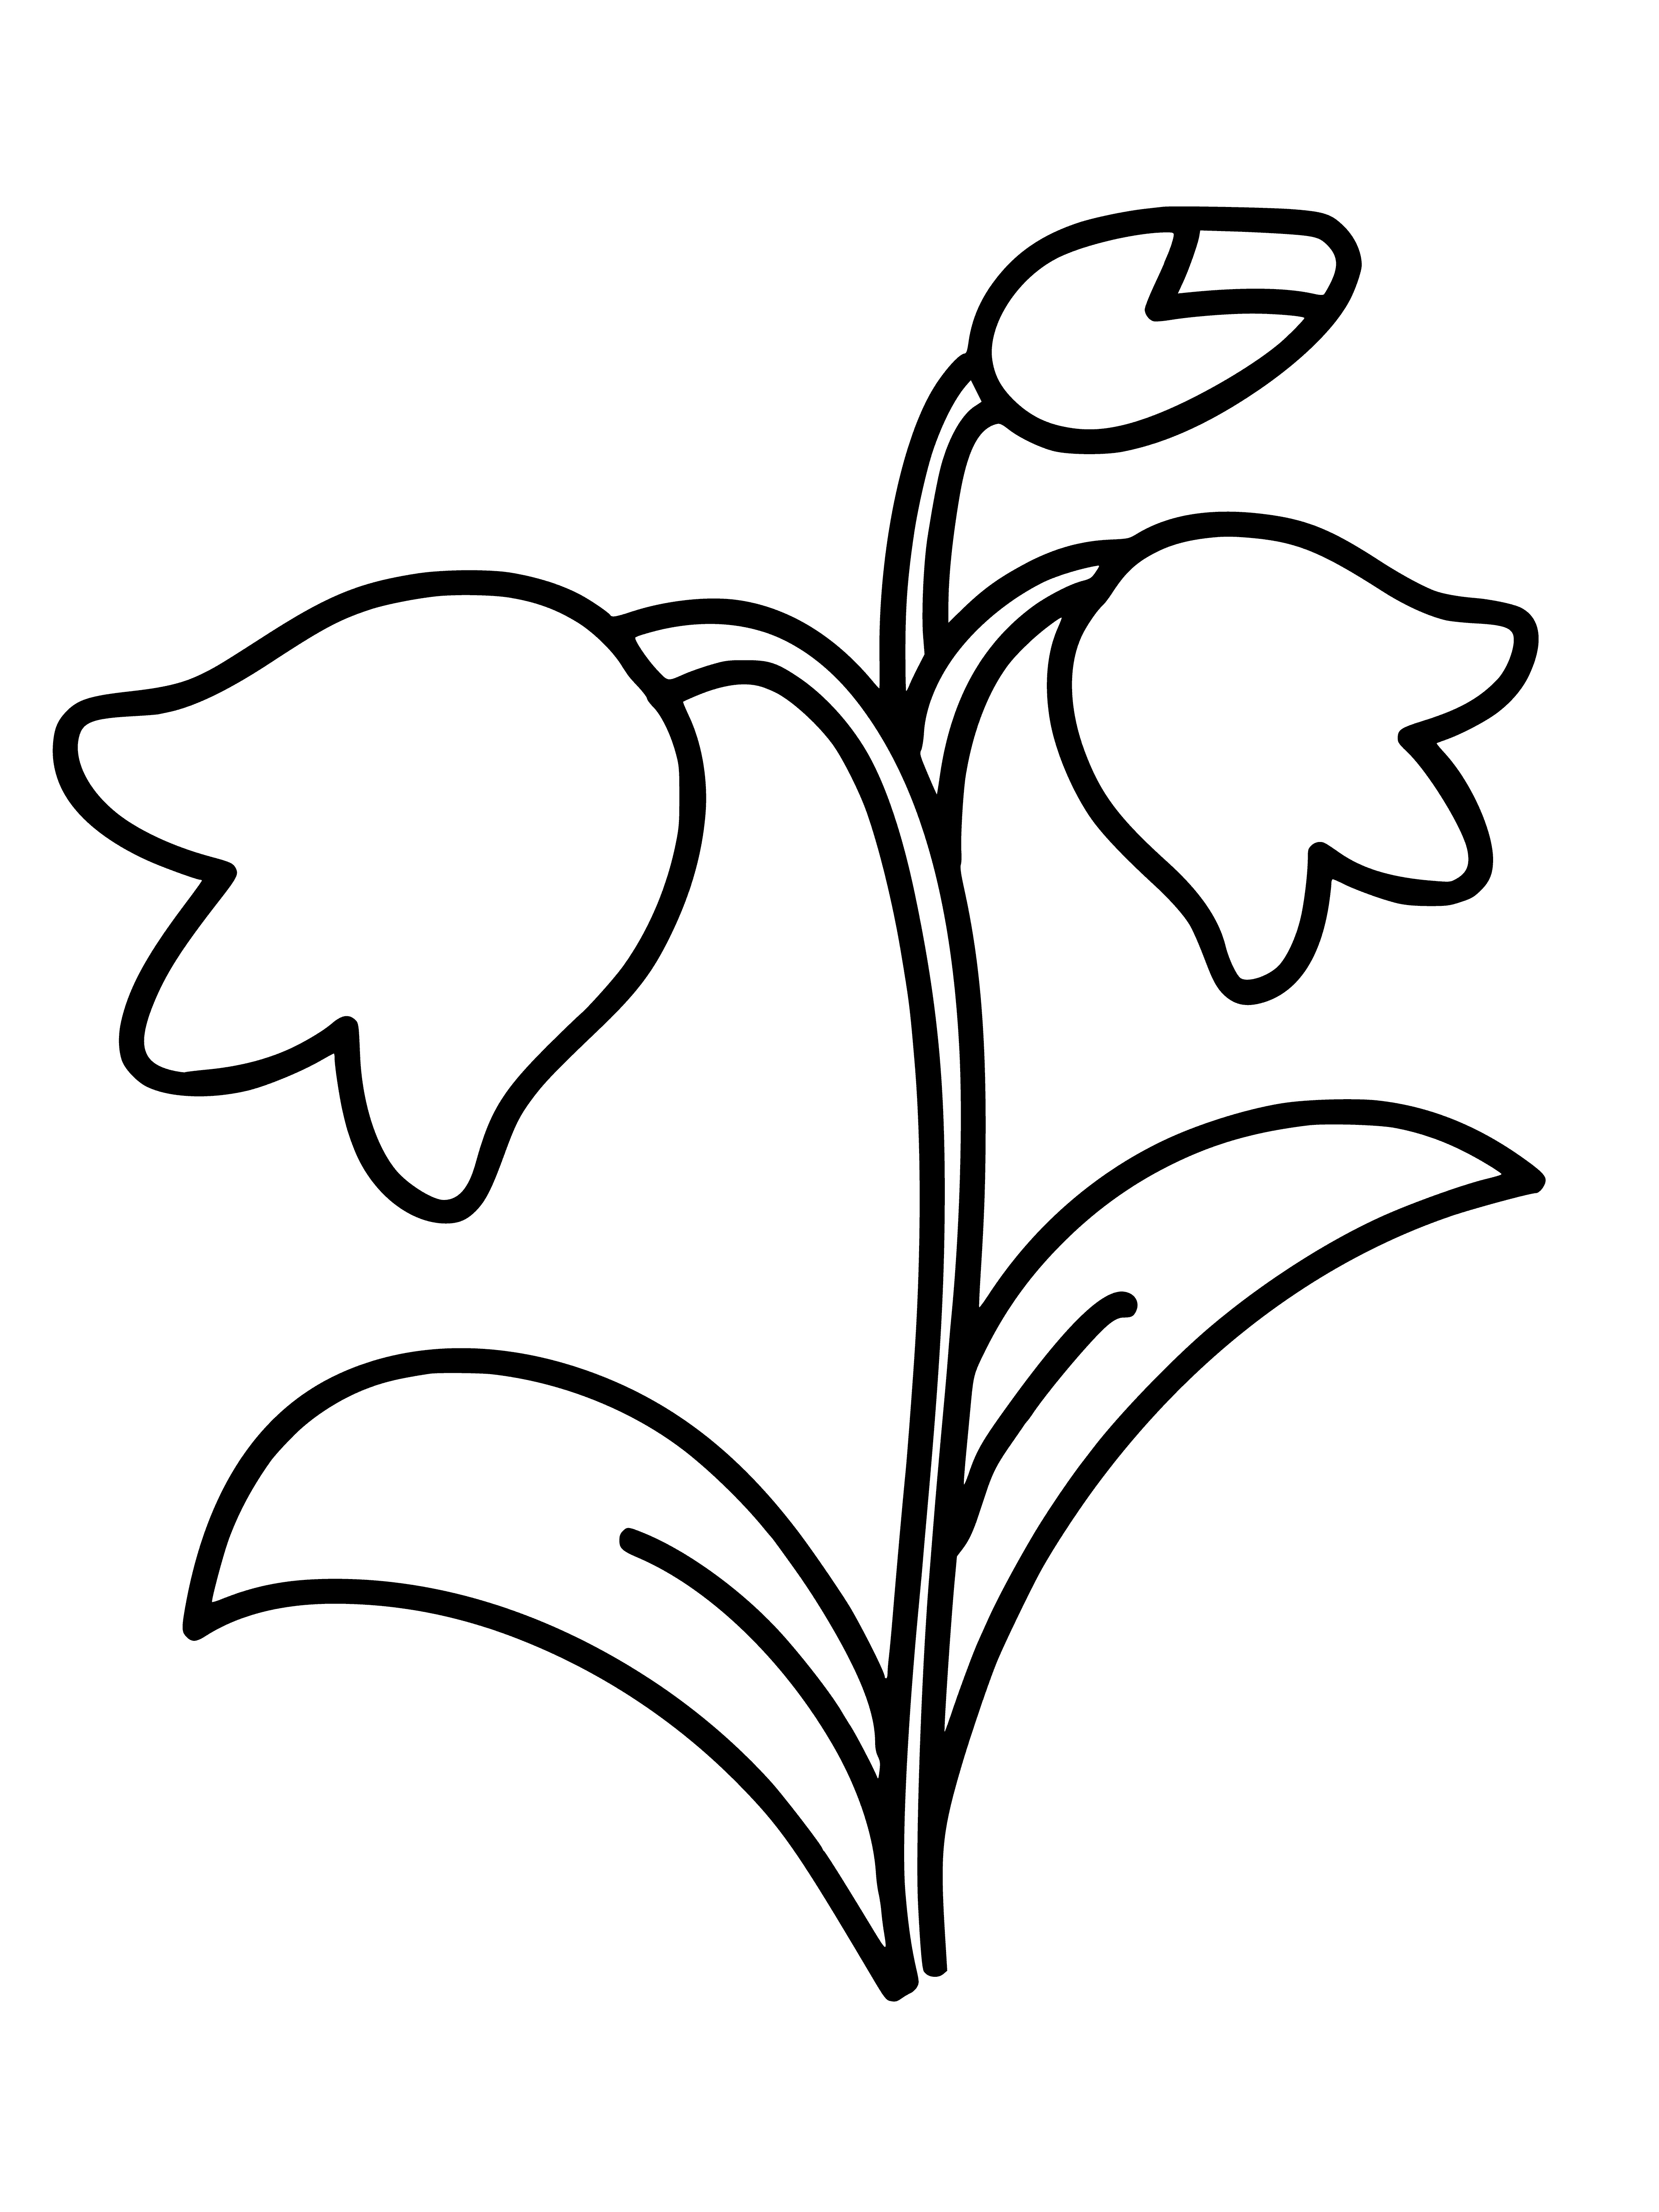 coloring page: Yellow bell-shaped flower w/ green stem & ruffled petals, 3 each side. Center darker yellow, 6 thin green pistils, surrounded by leaves.